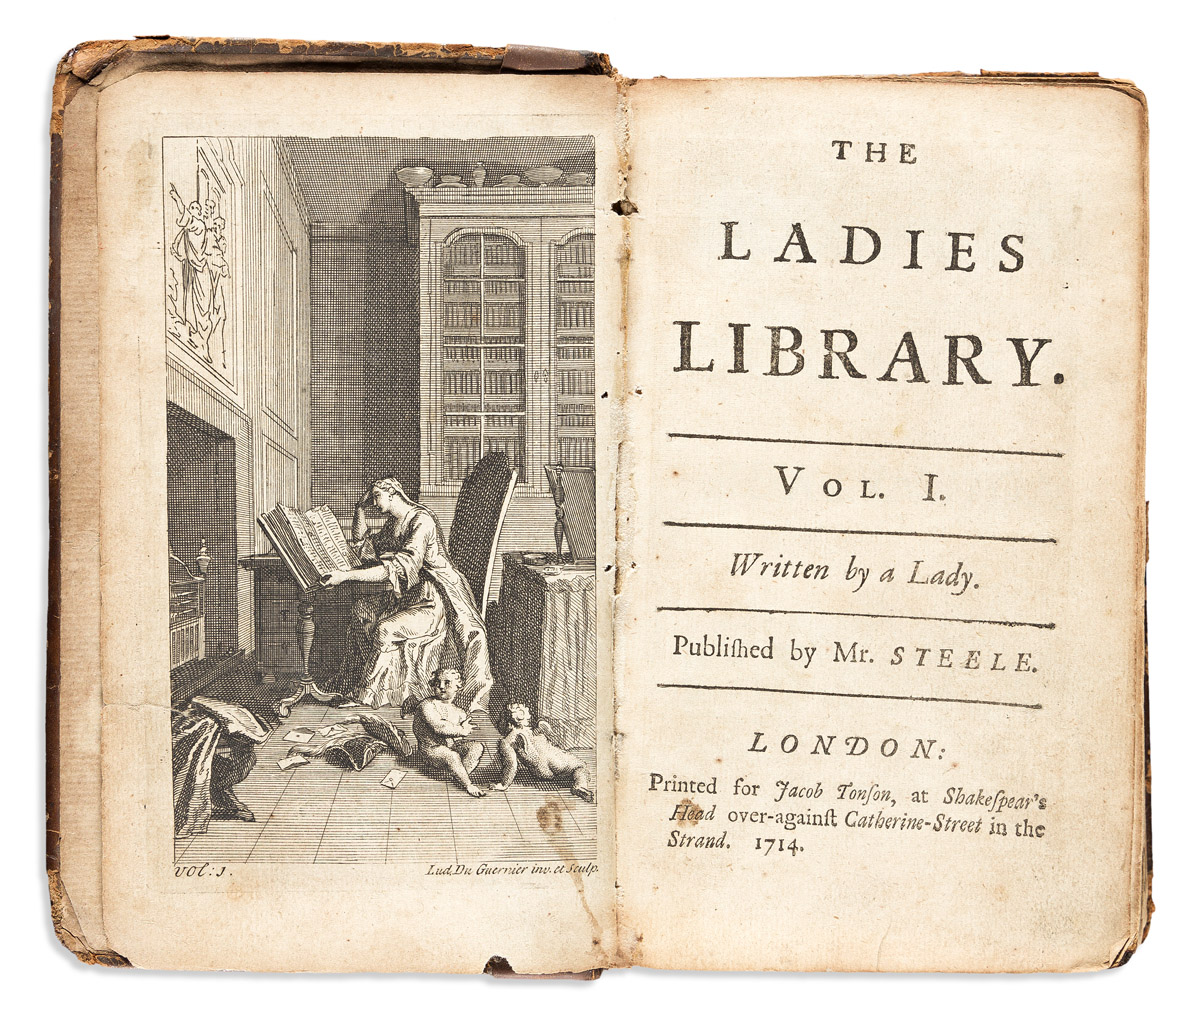 Steele, Richard (1672-1729) The Ladies Library, Written by a Lady.